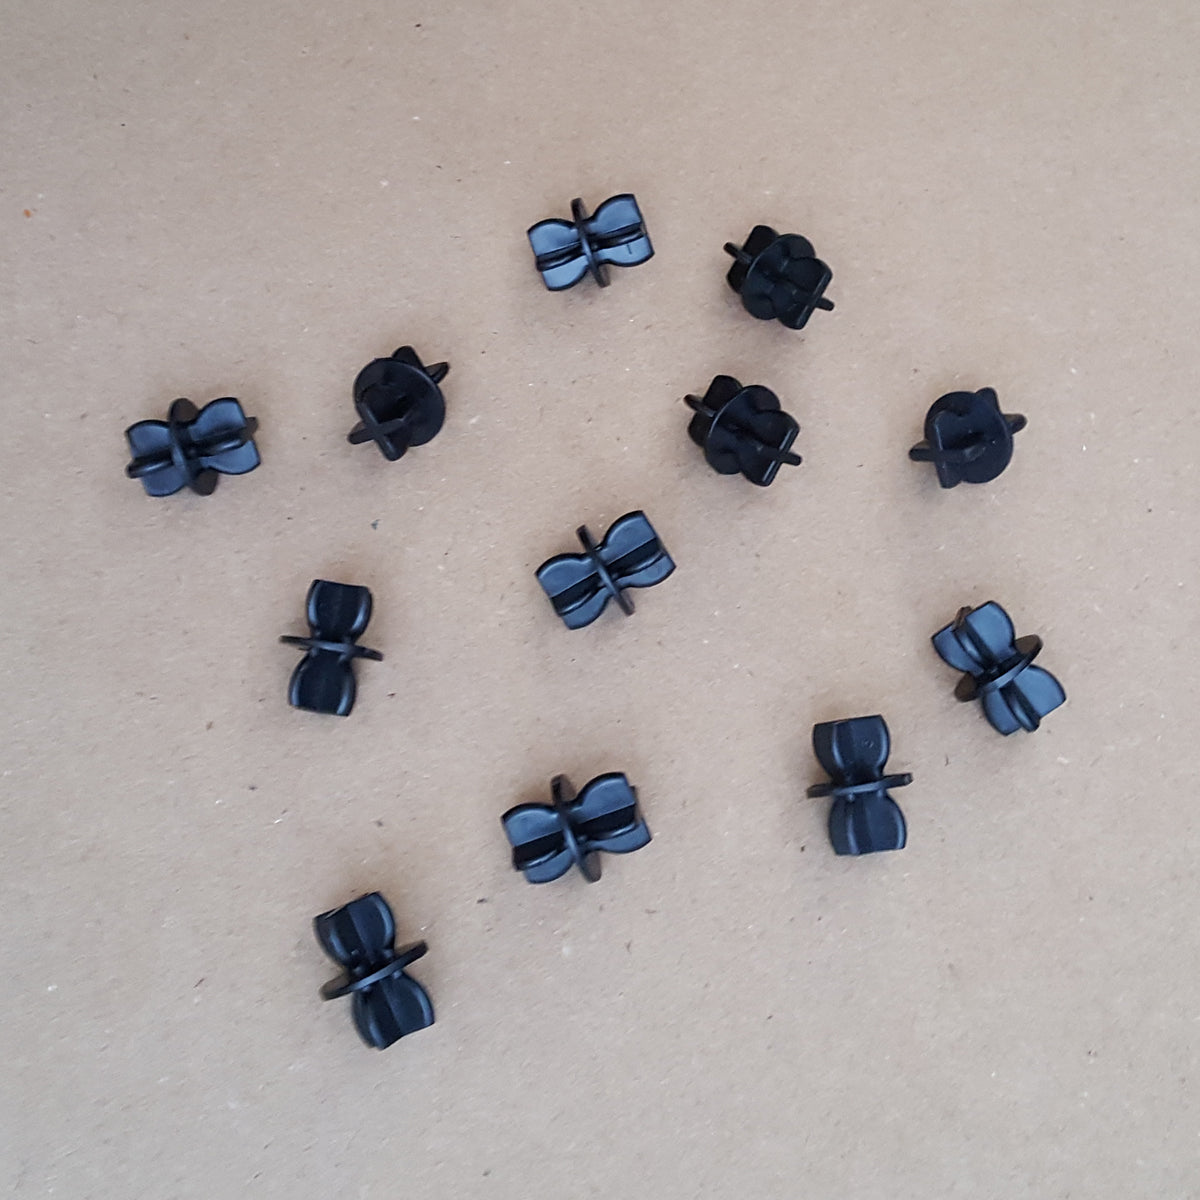 Scalextric 1:32 Sport - C8226 Track Support Clips / Connectors - Black x 12